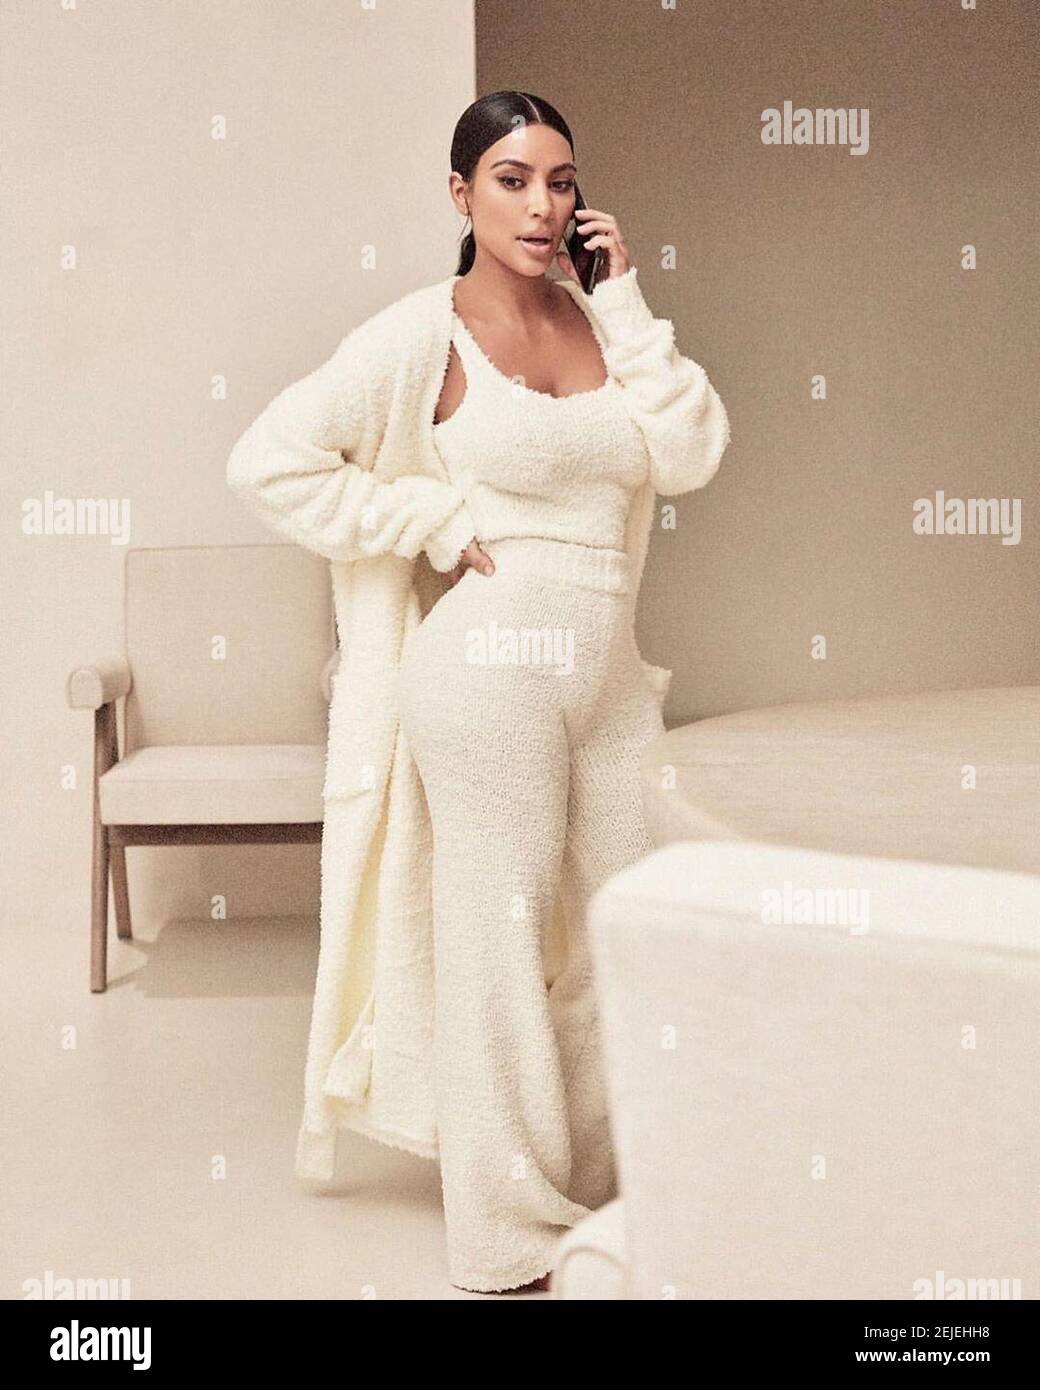 Kris Jenner releases a photo on Instagram with the following caption :  Can't wait for the @skims cozy collection launch! Monday 9am pst on Skims.com  #repost @kimkardashian OMG I've been dying to